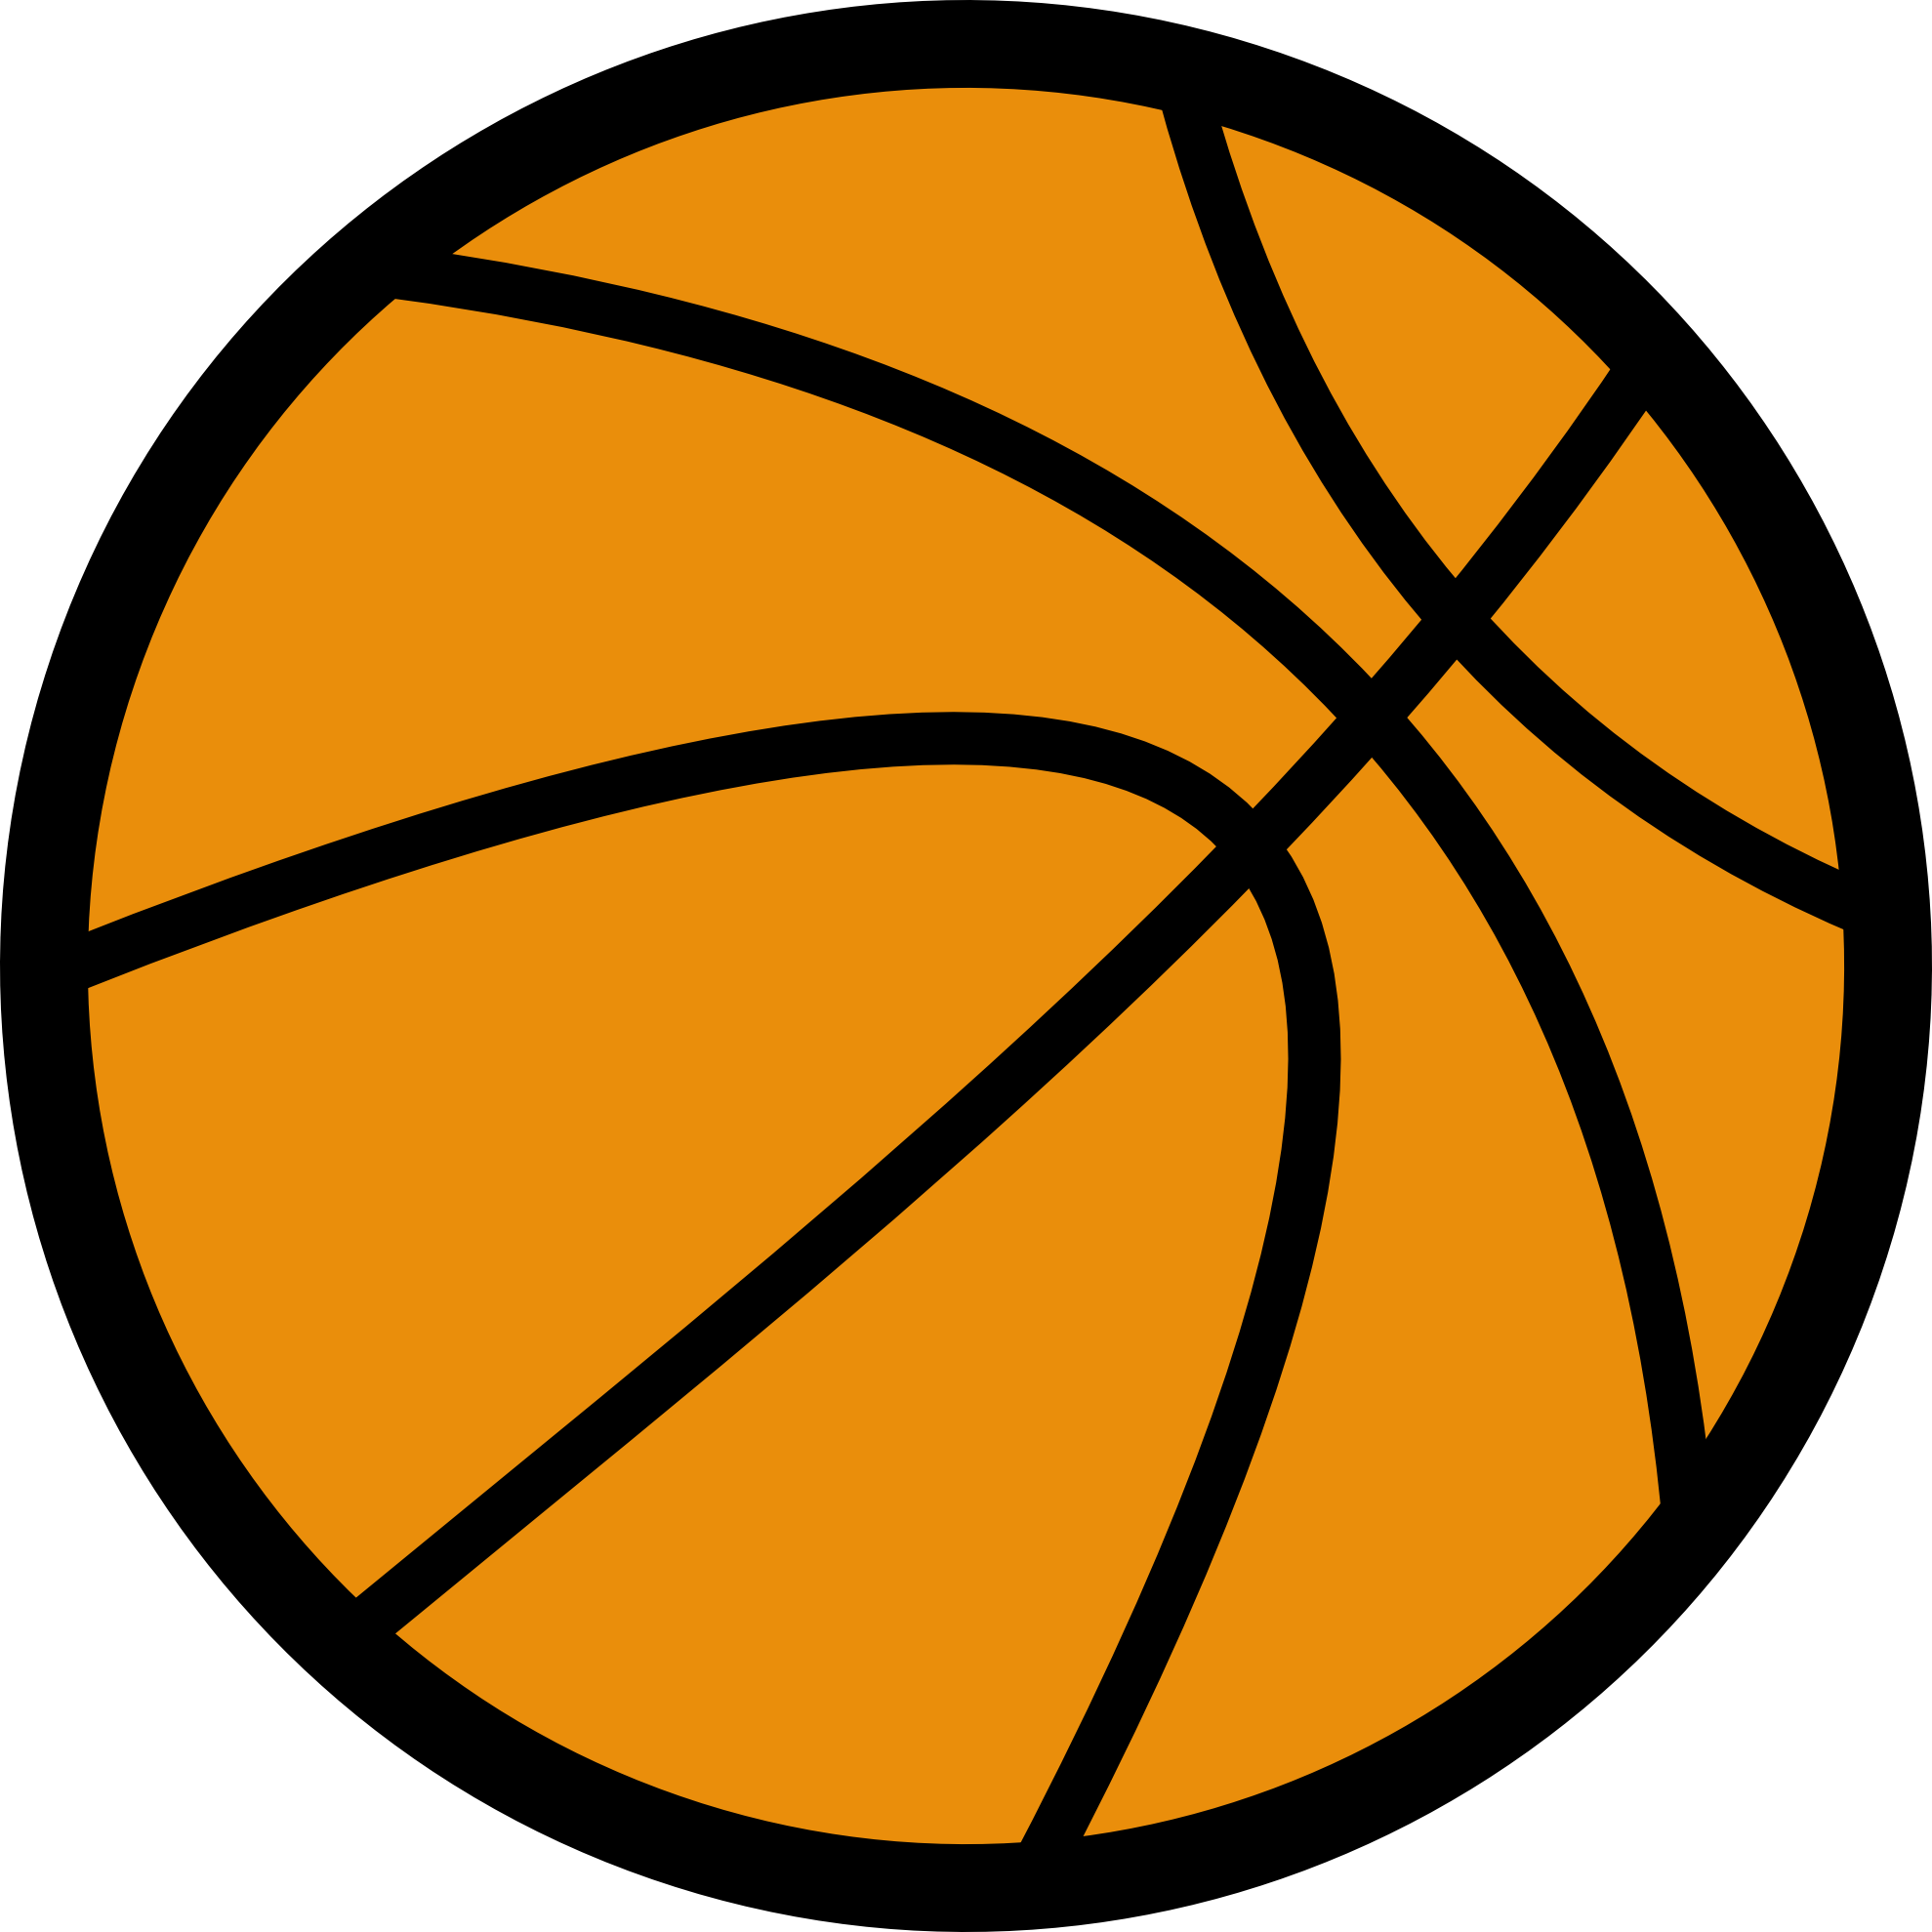 Picture Of A Basketball Ball